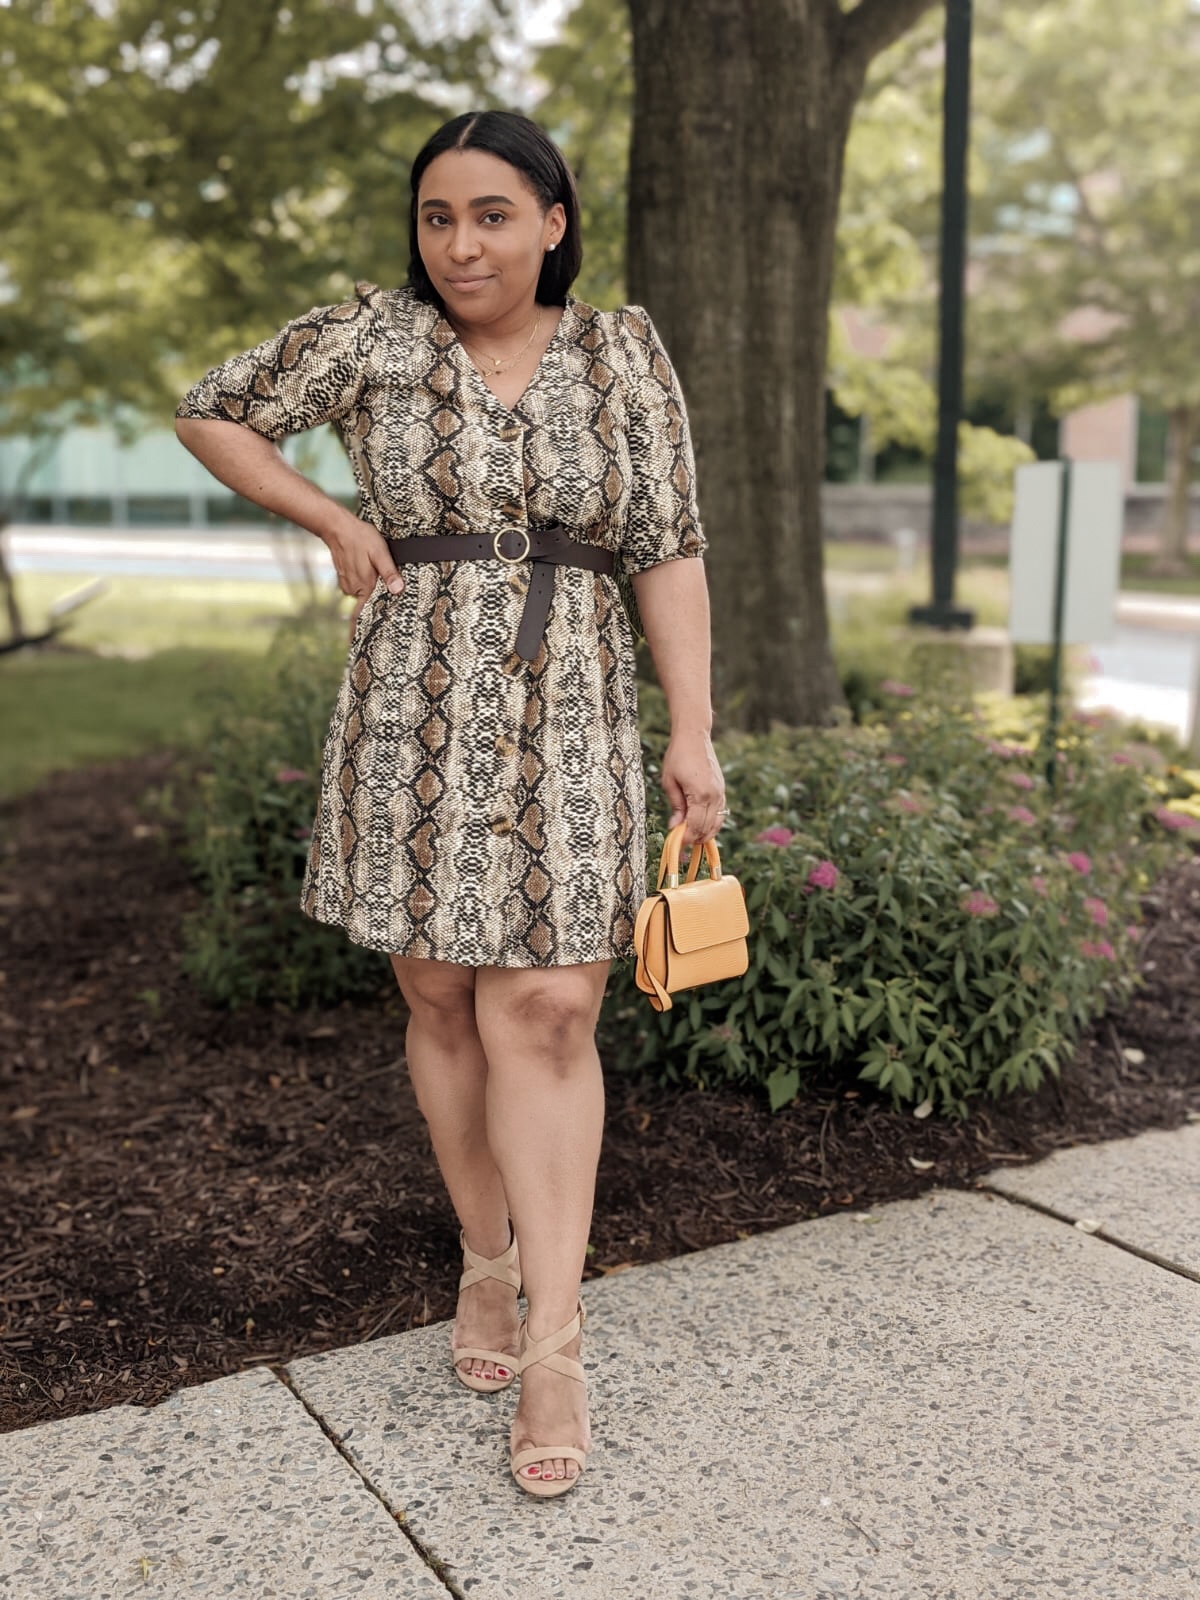 dress lilly, printed dress, snake print dress, how to style animal print, different ways to wear animal print, pattys kloset, summer outfit ideas, summer dresses